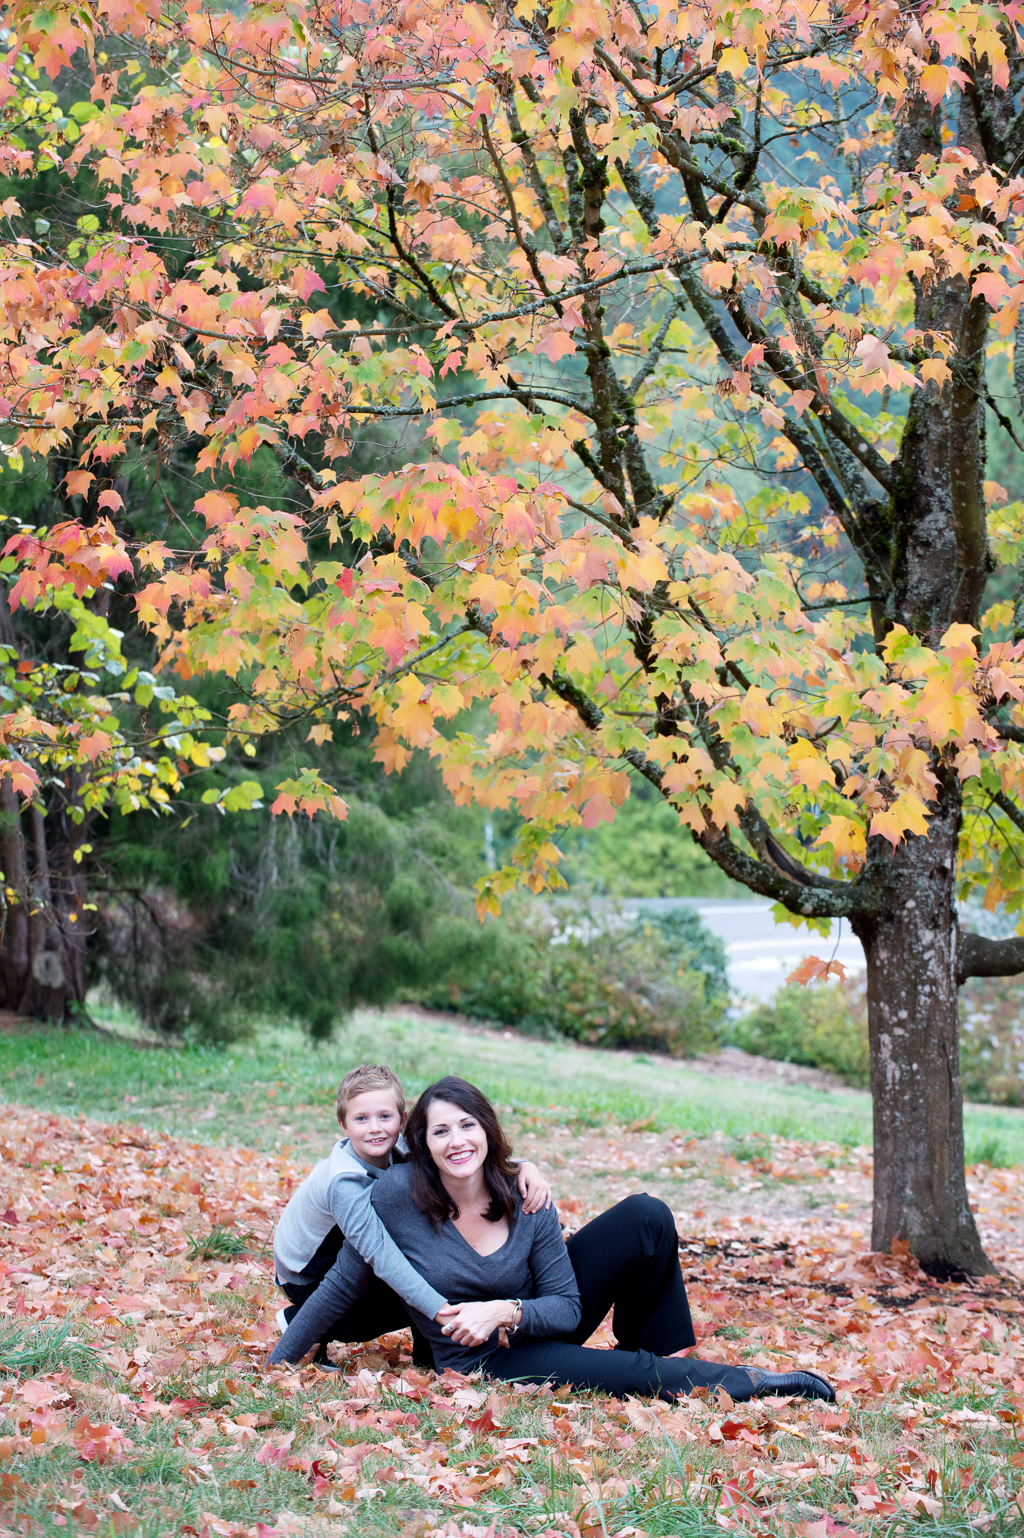 a mother and her son embrace while sitting in a pile of leaves